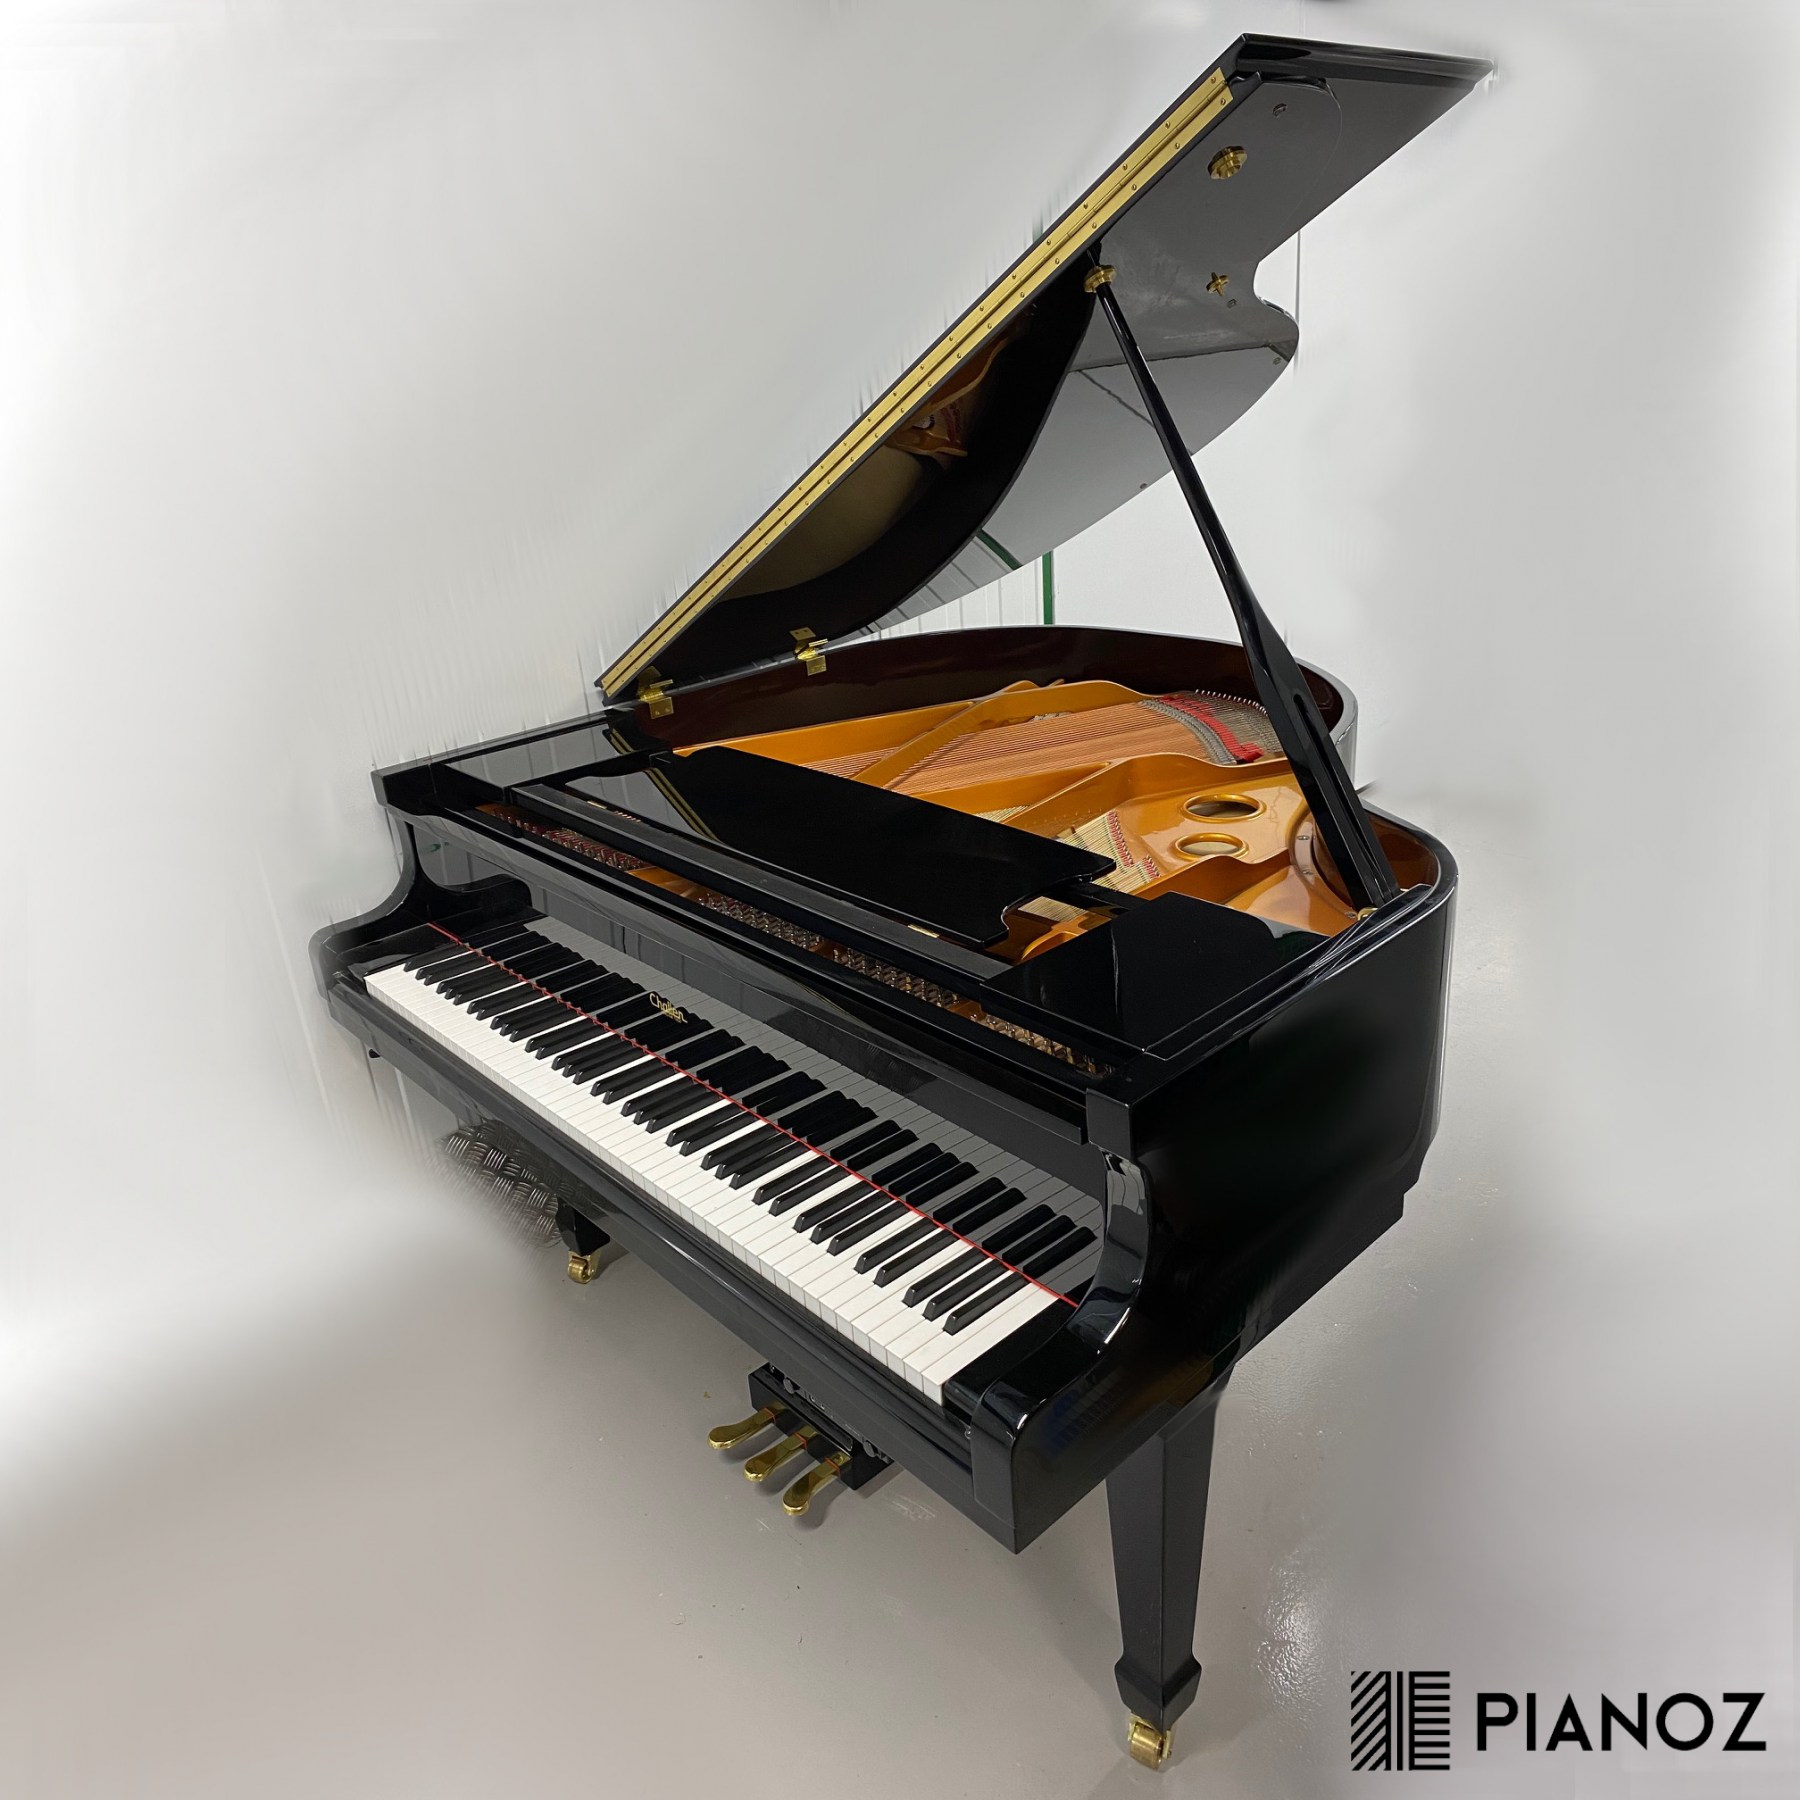 Challen Silent System Baby Grand Piano piano for sale in UK